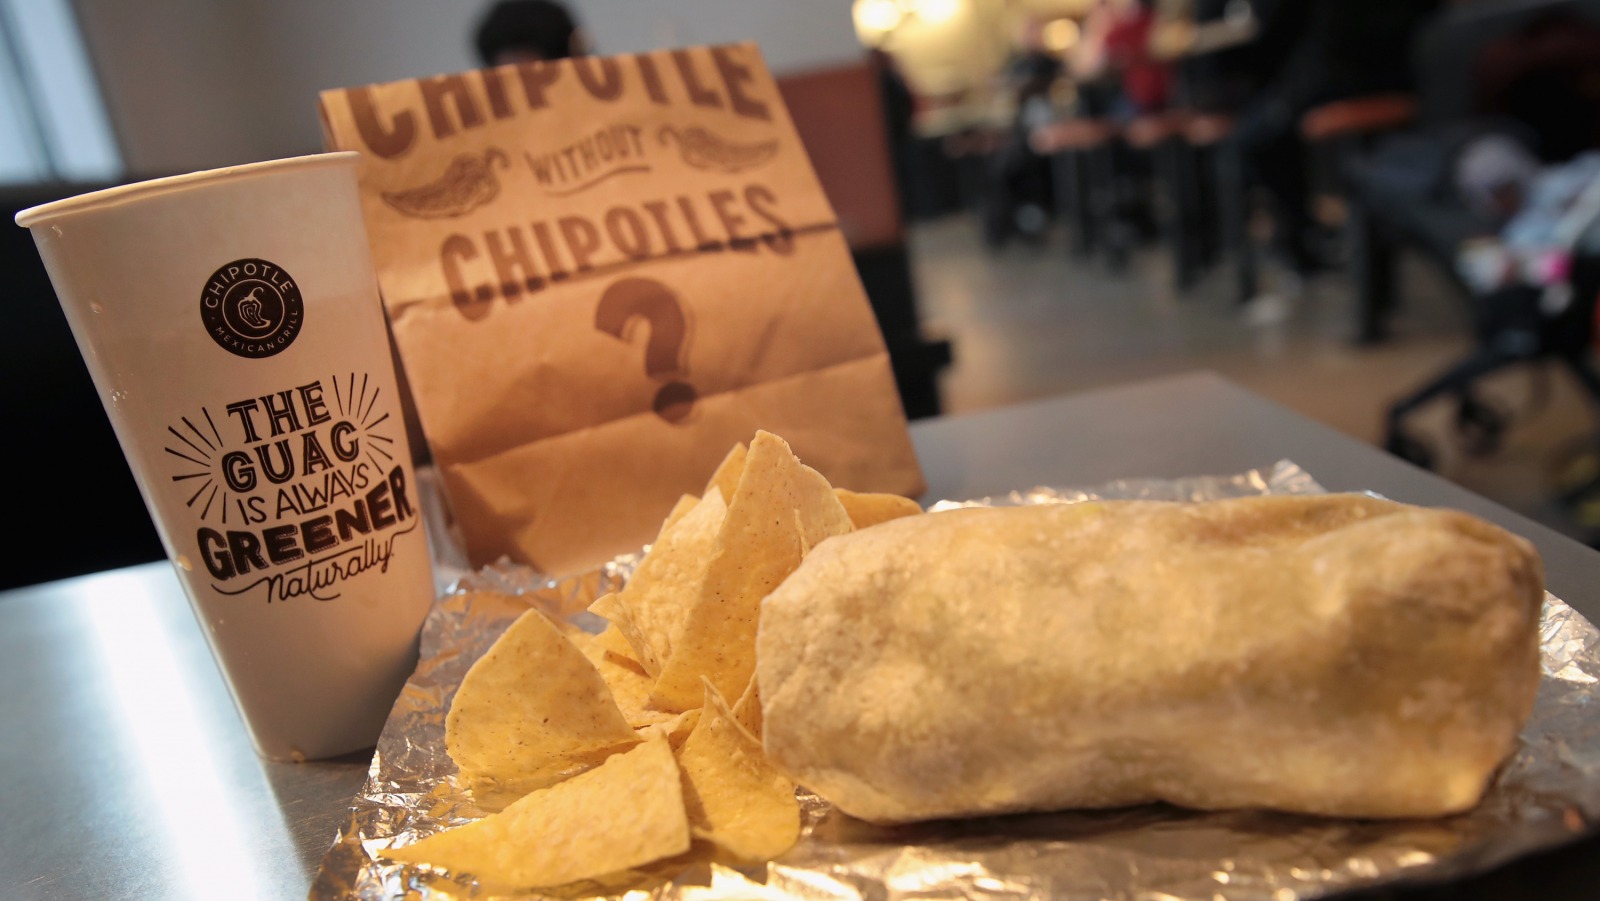 Chipotle's Boorito Promotion Will Be Different This Year. Here's What